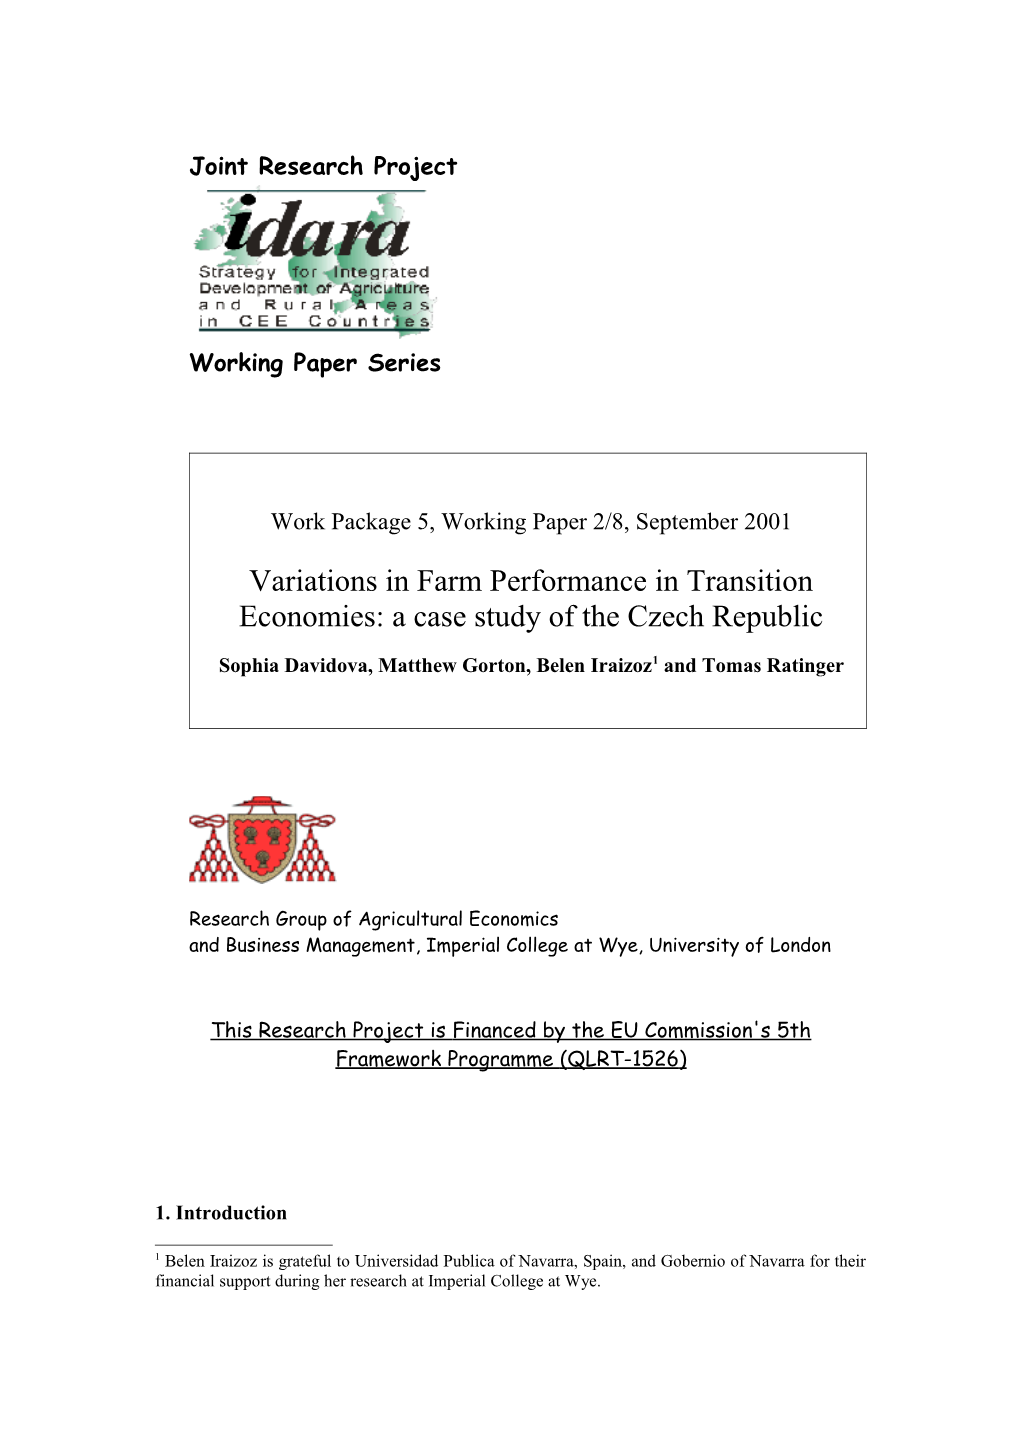 Variations in Farm Performance in the Transitional Economies: a Case Study of the Czech Republic